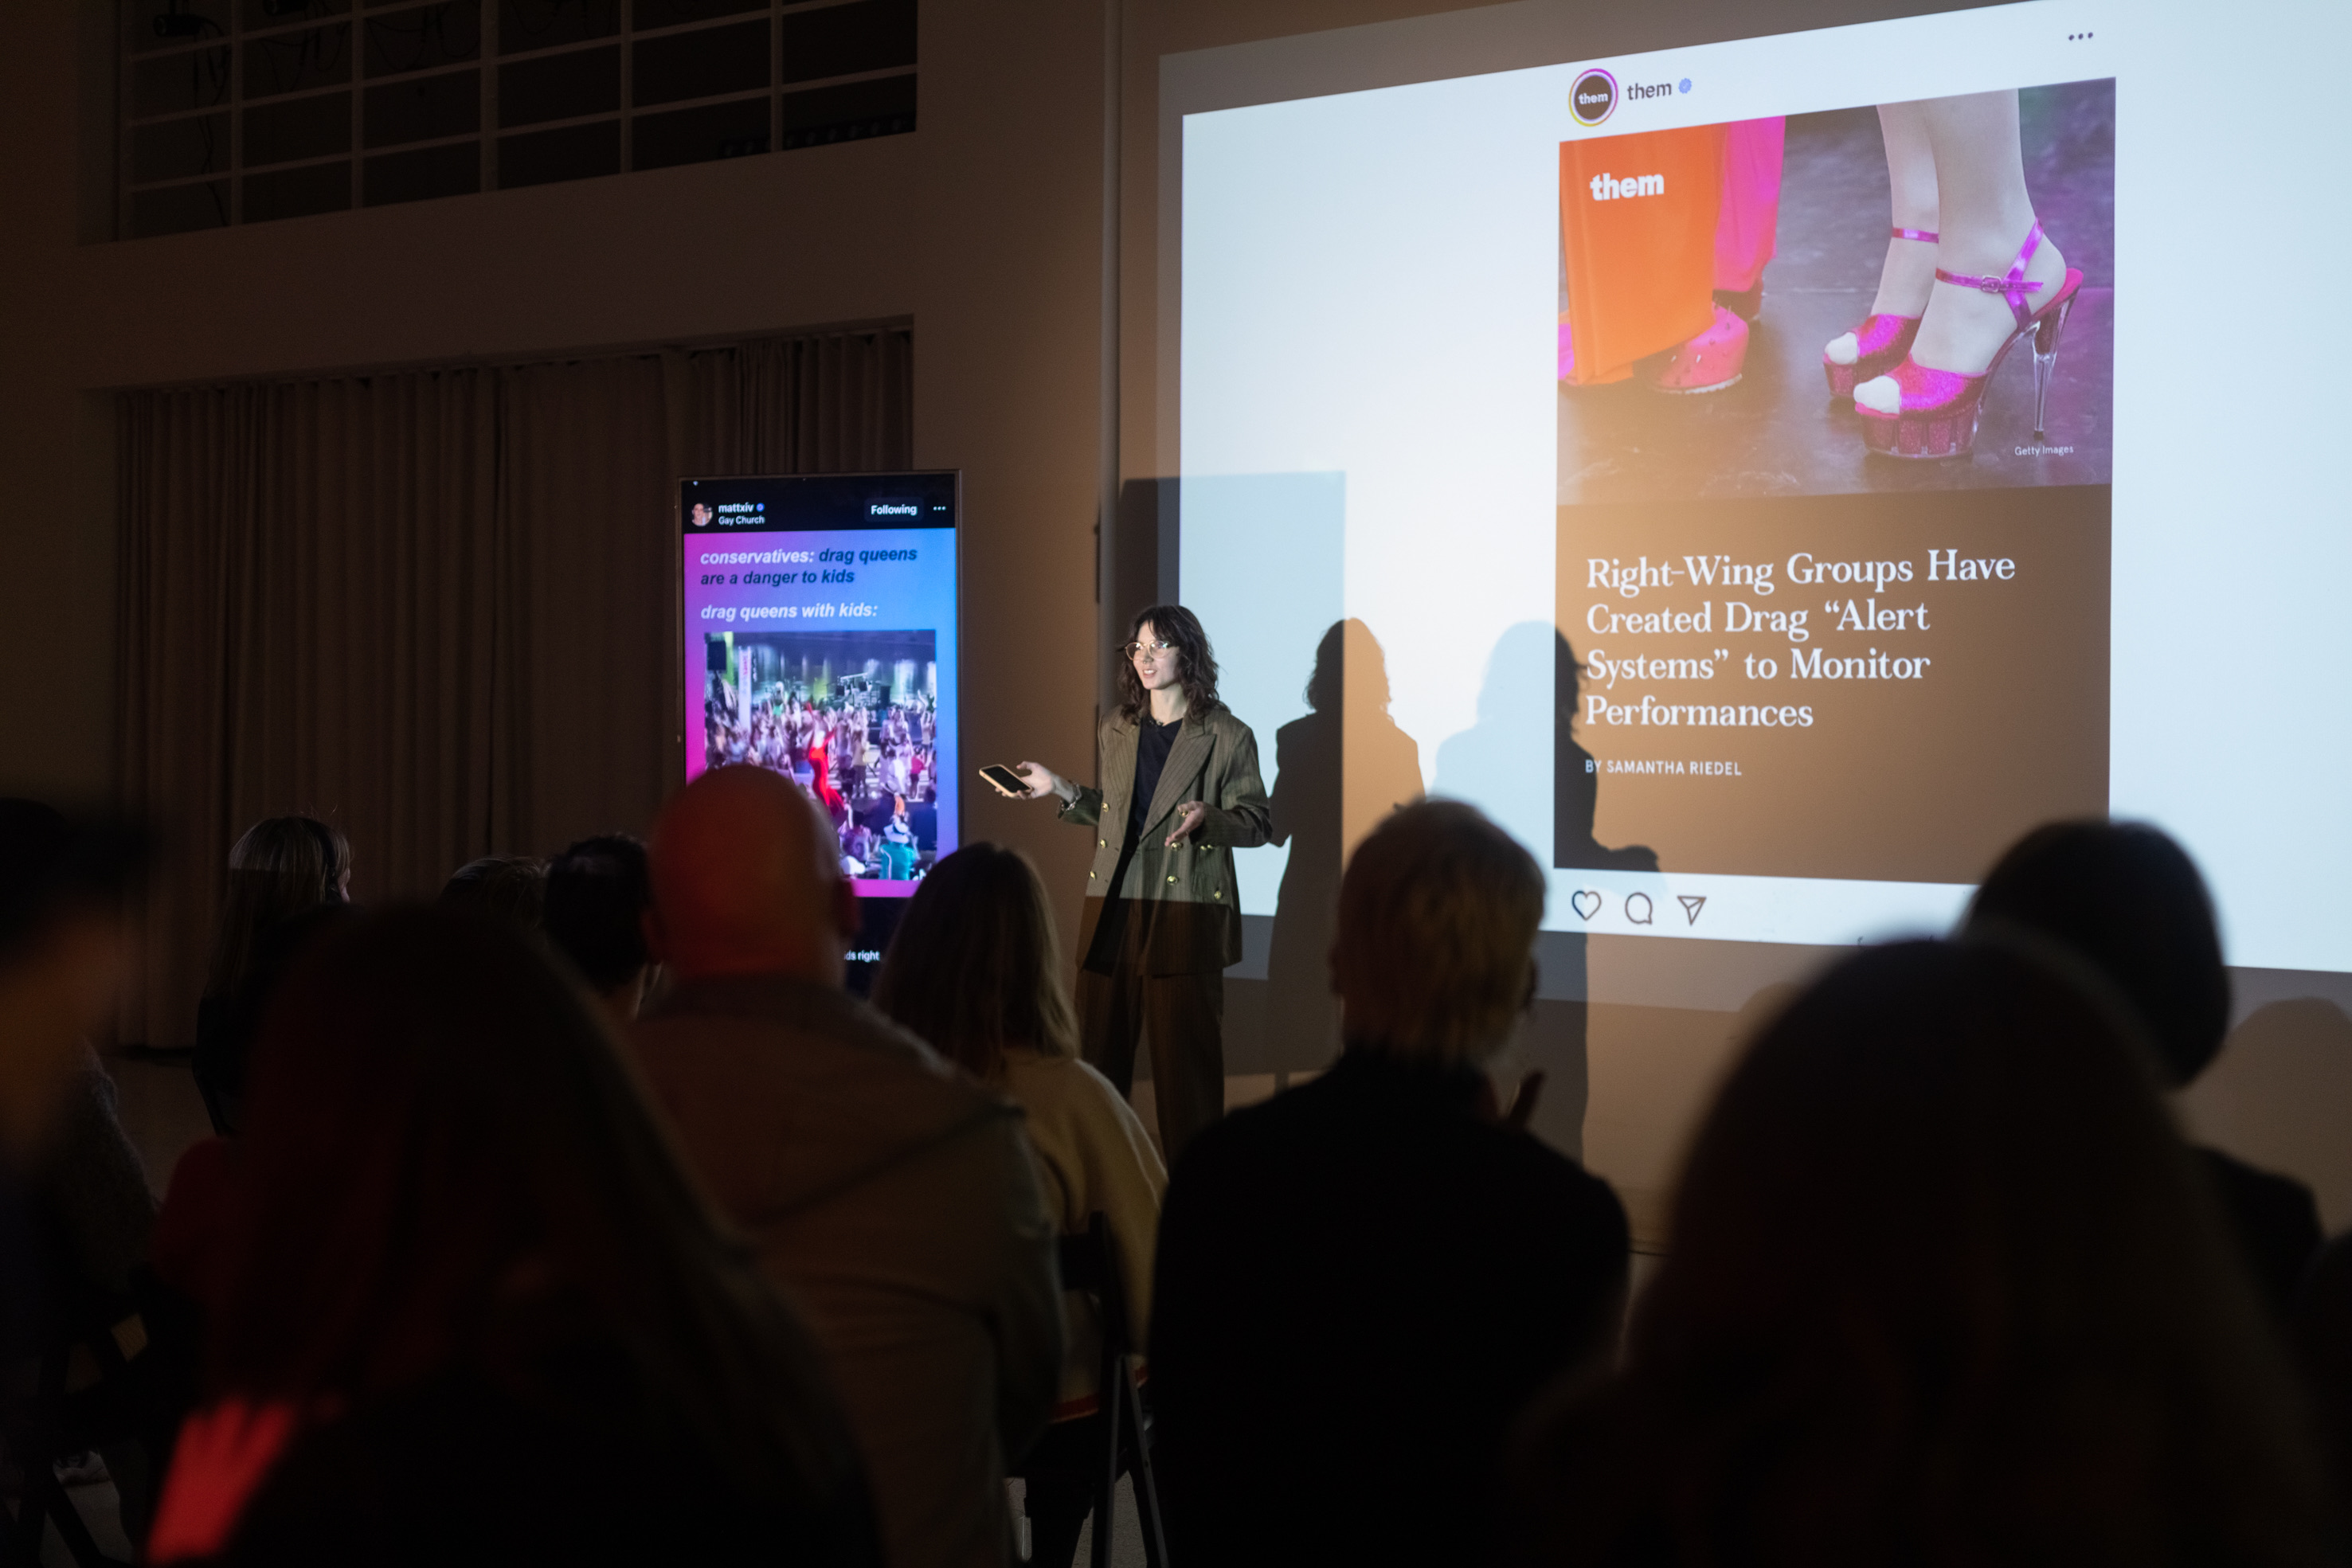 A person with phone in hand wearing a suit is giving a performative lecture in front of a crowd, a vertical TV is standing next to them and a presentation projection is behind them